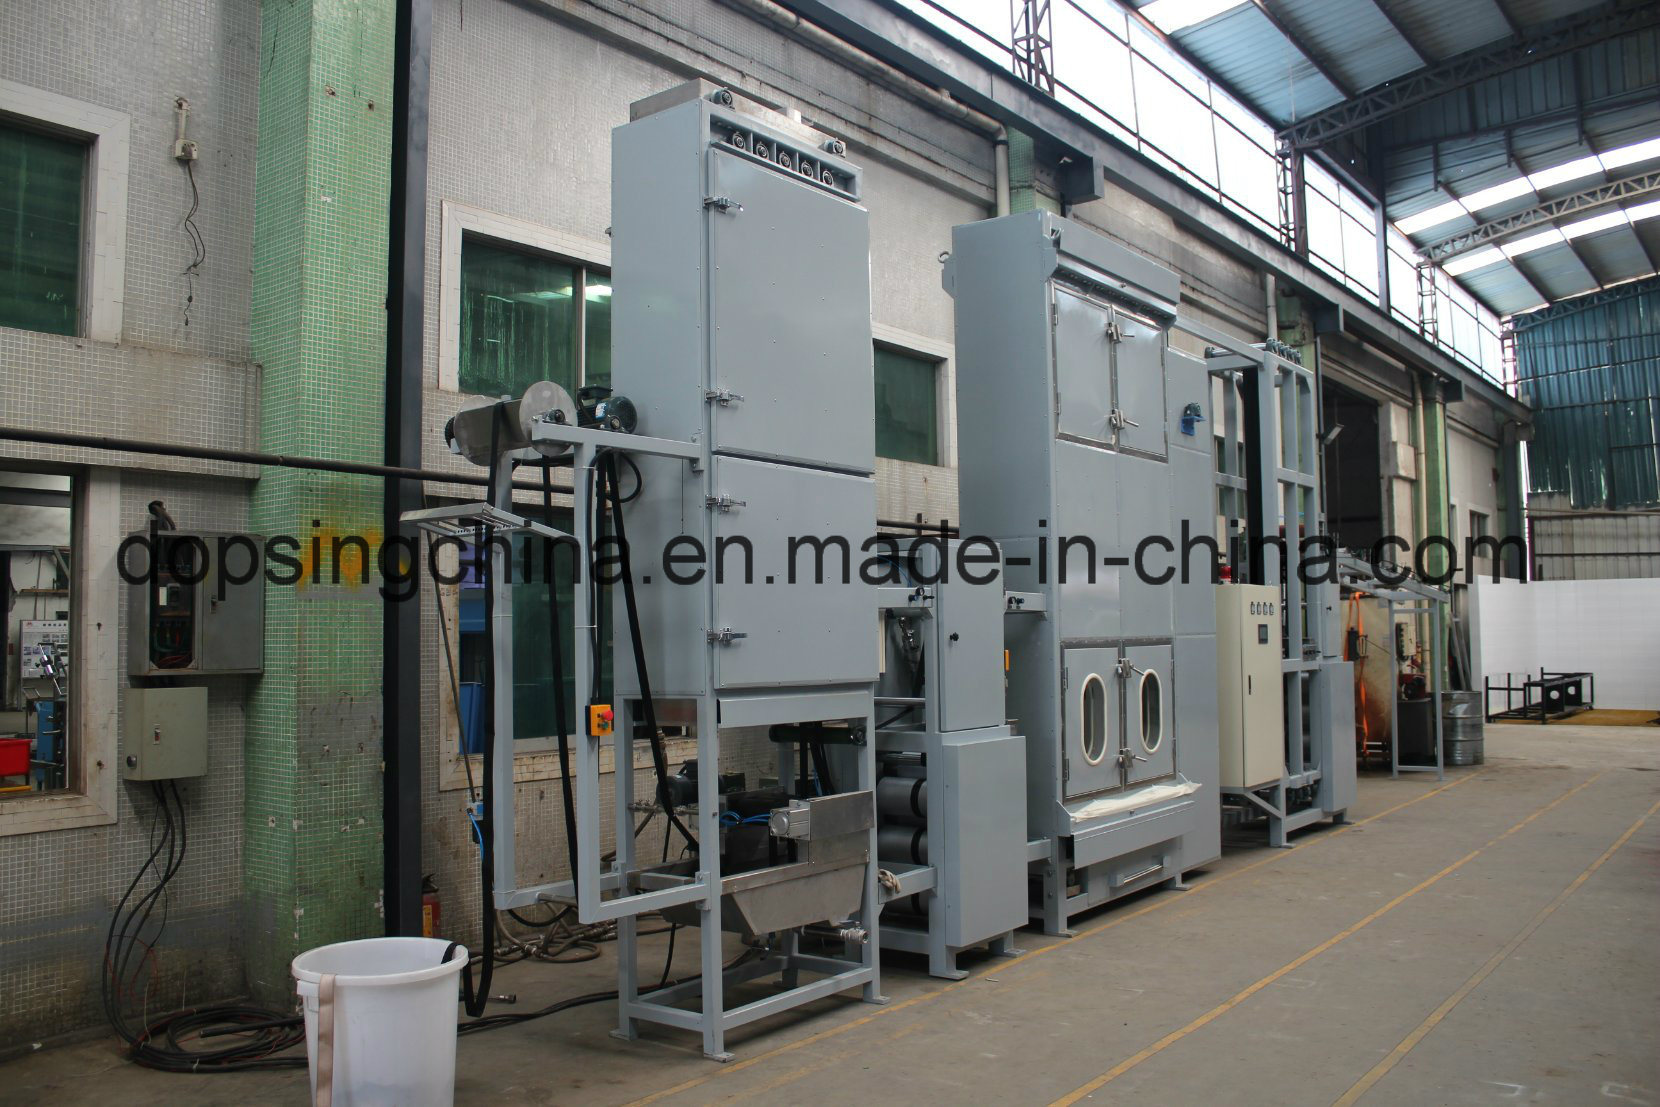 600mm Cargo Sling Webbings Dyeing and Finishing Machine Prices Featured Image